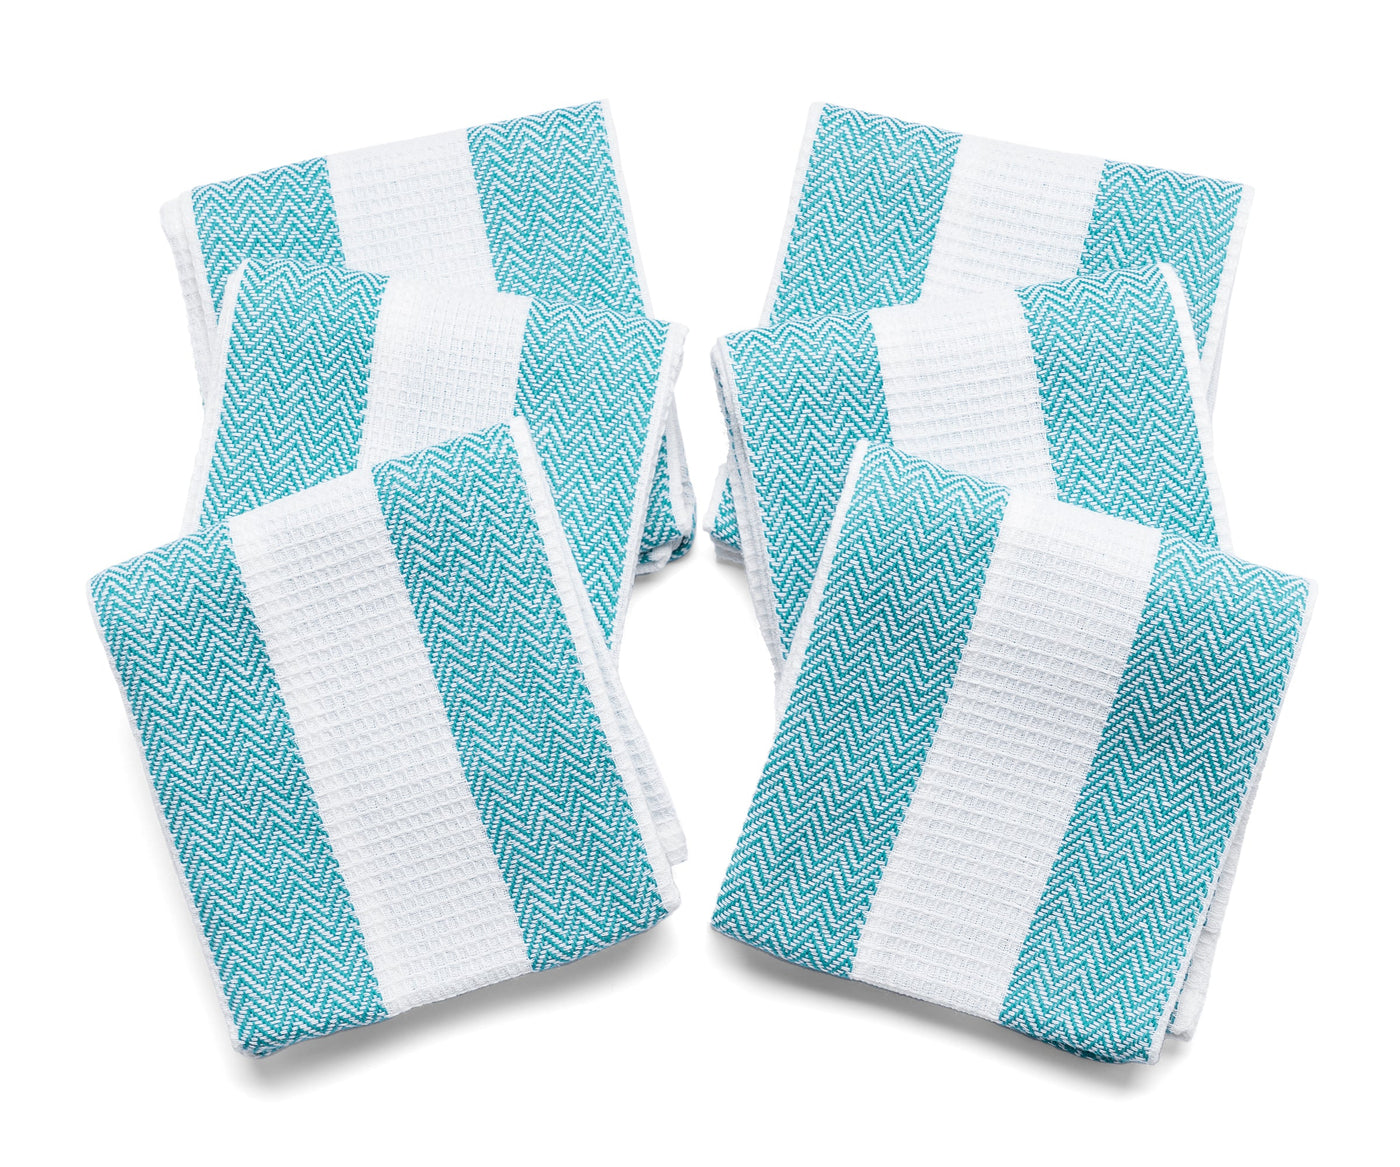 Hand towels for the kitchen, functional and stylish additions to your cooking space.